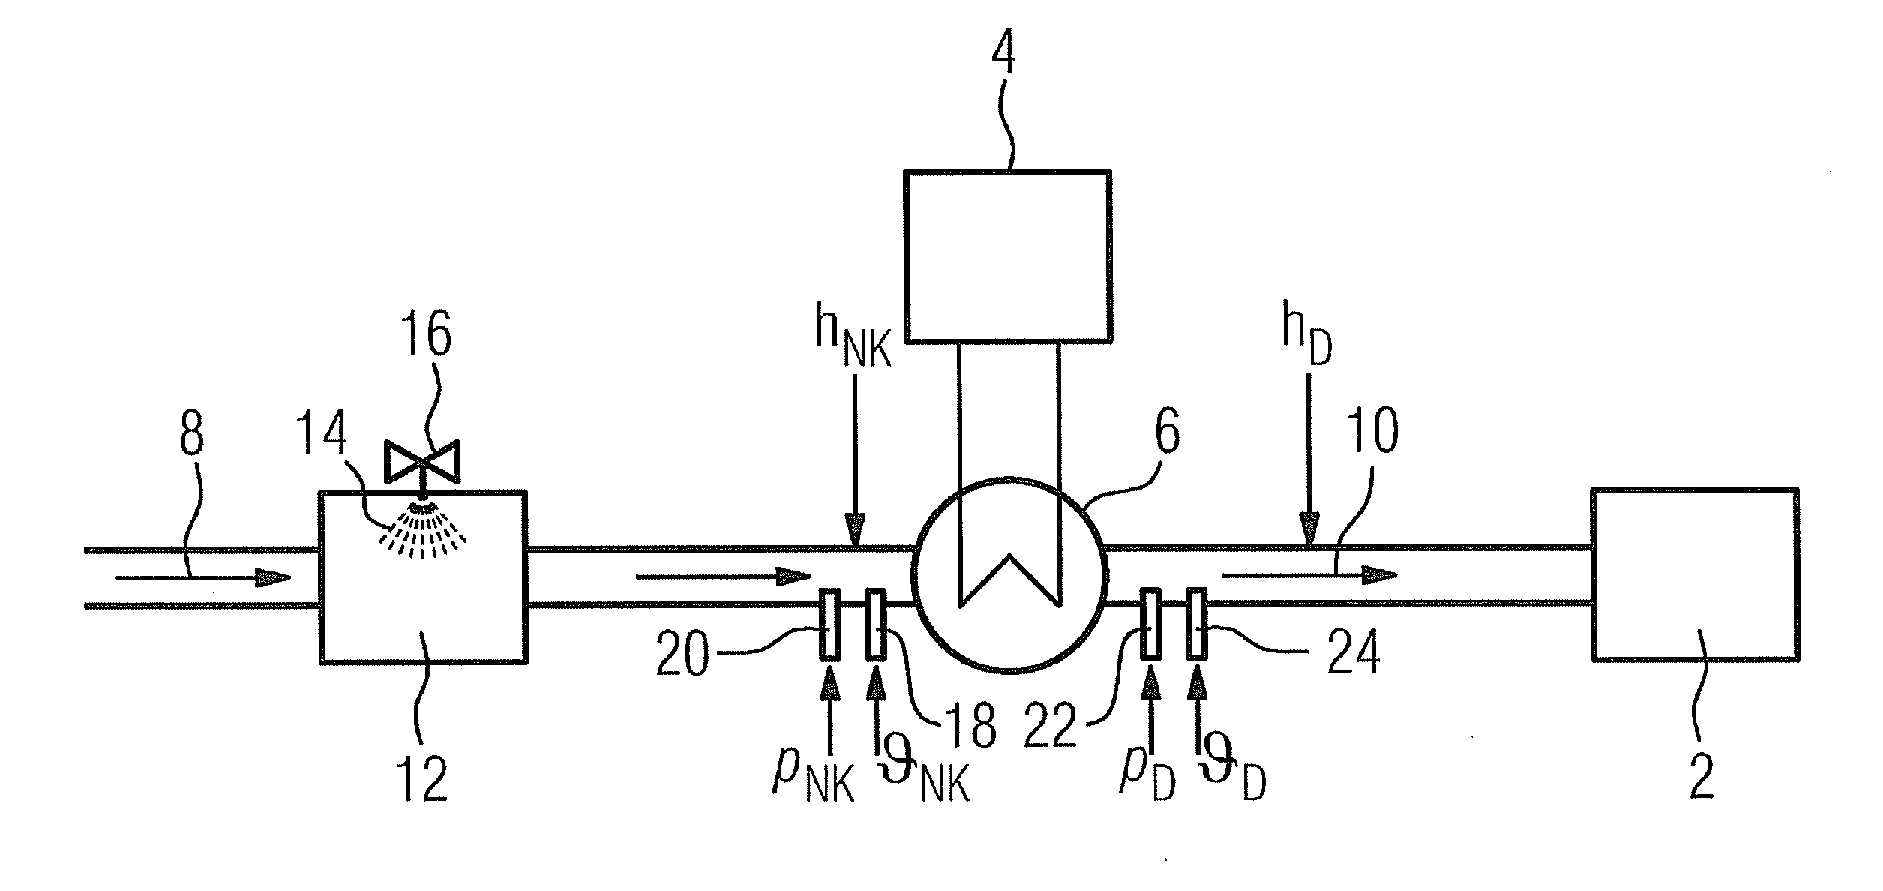 Method and device for controlling the temperature of steam for a steam power plant